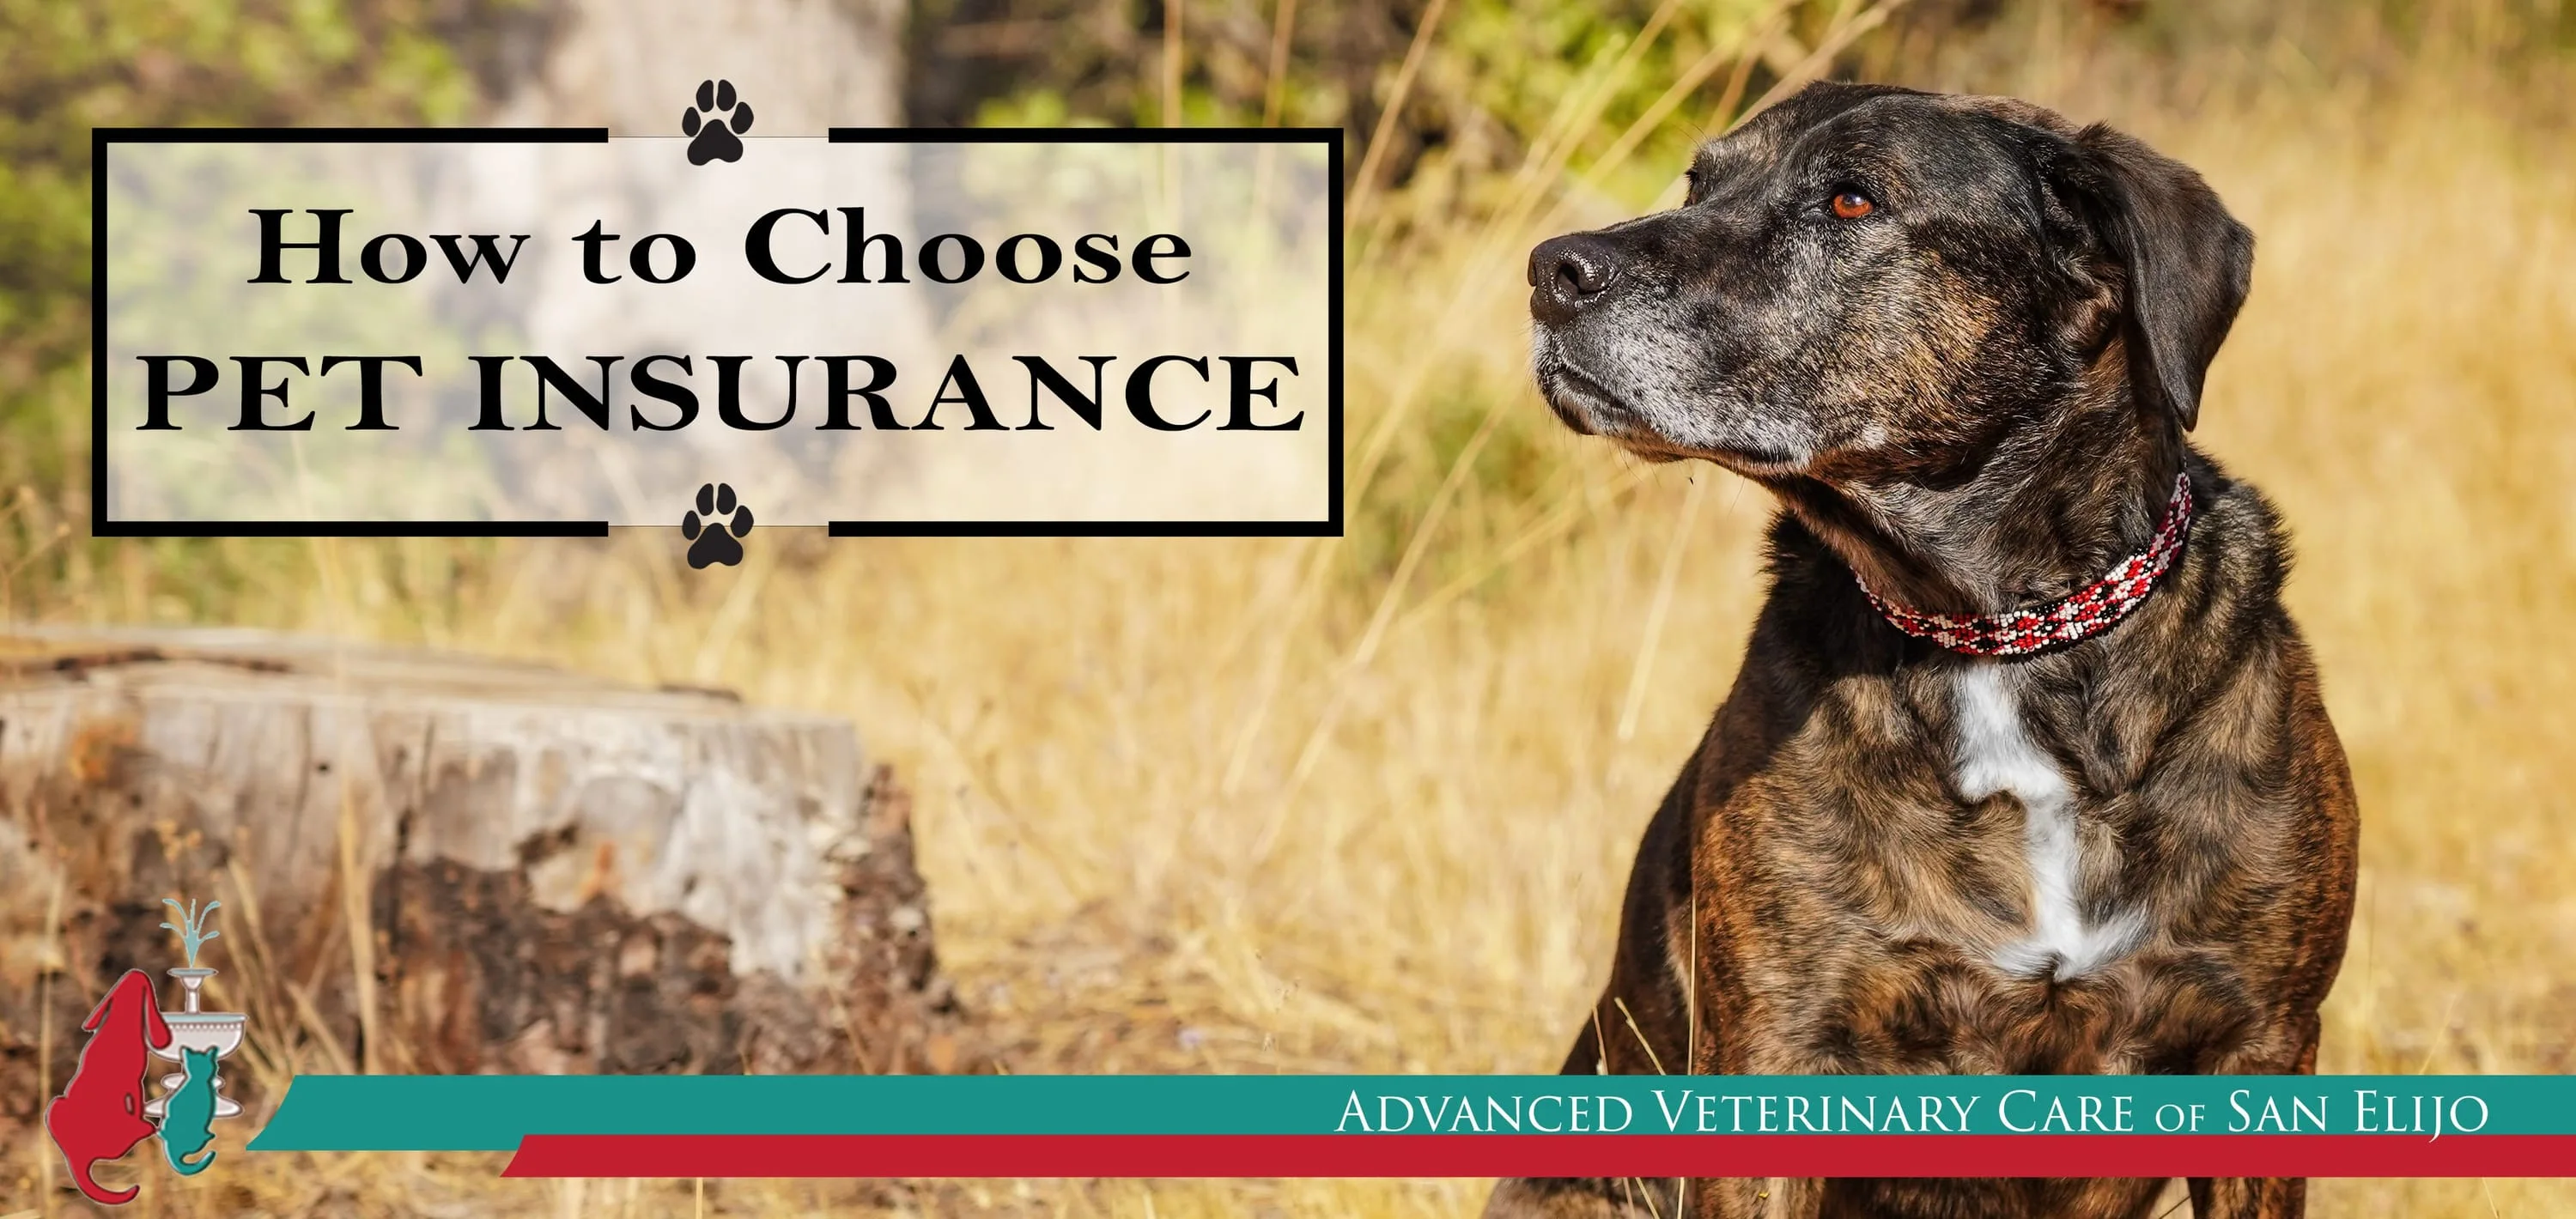 Brindle dog in a field: How to Choose Pet Insurance